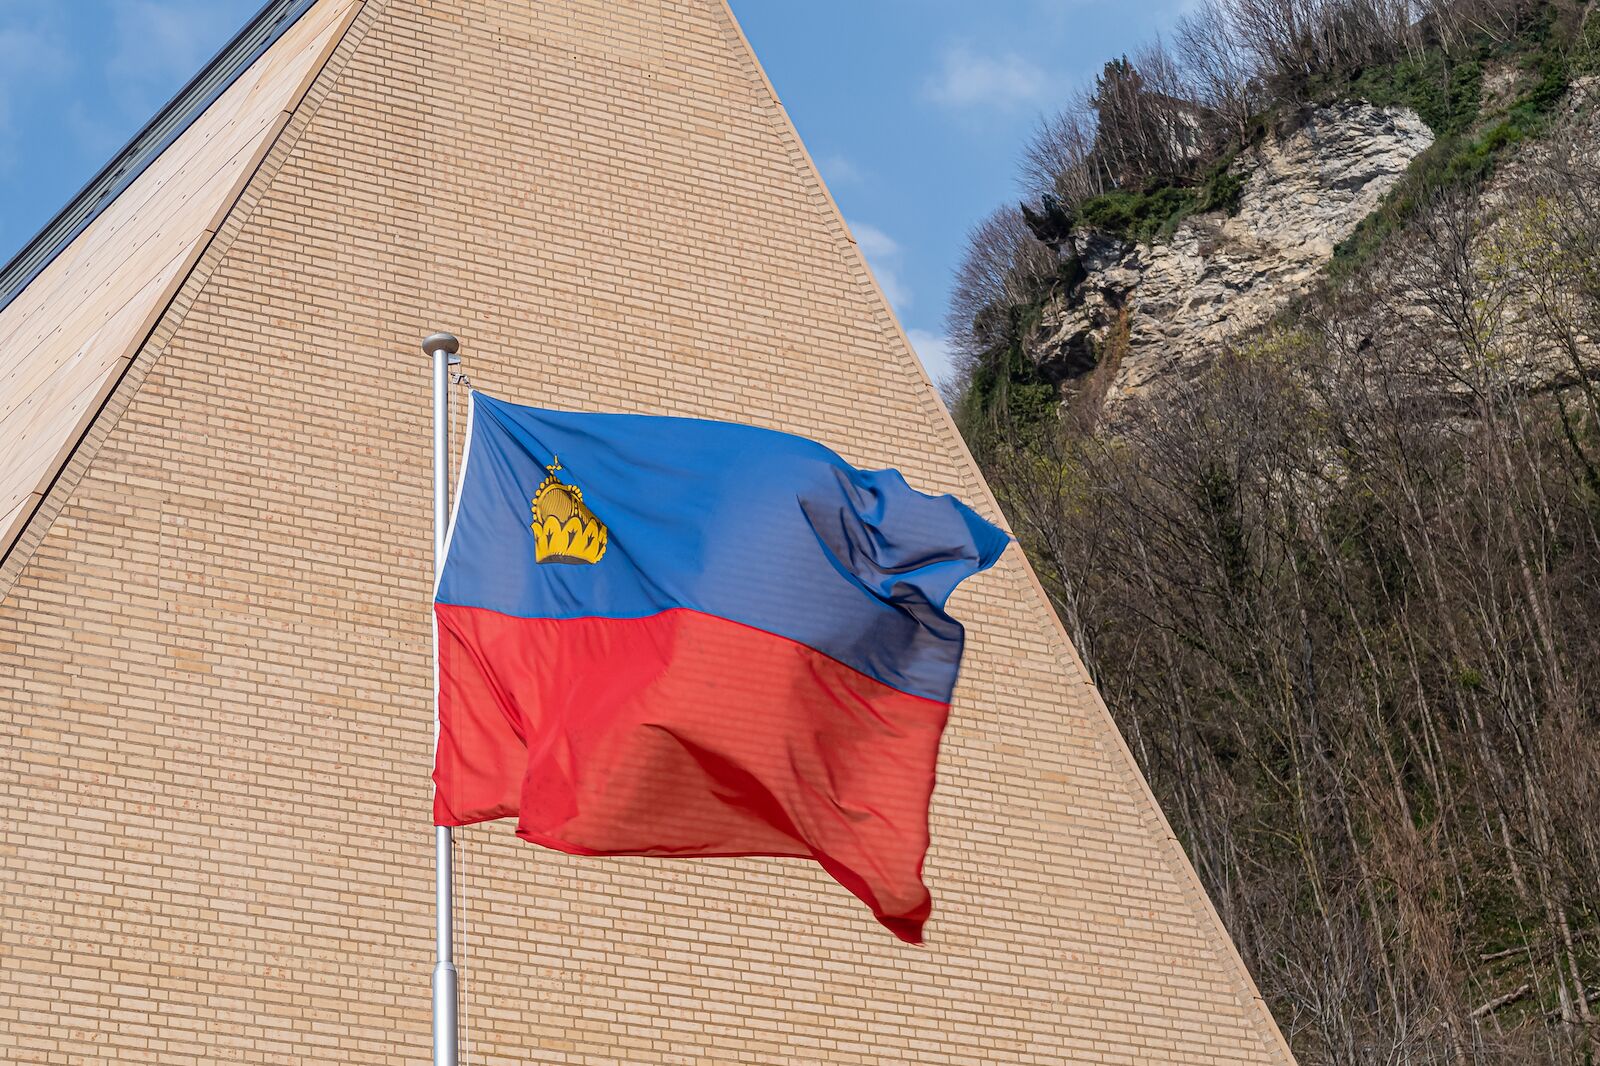 The national flag of the Principality of Liechtenstein in front of the Parliament building in Vaduz.